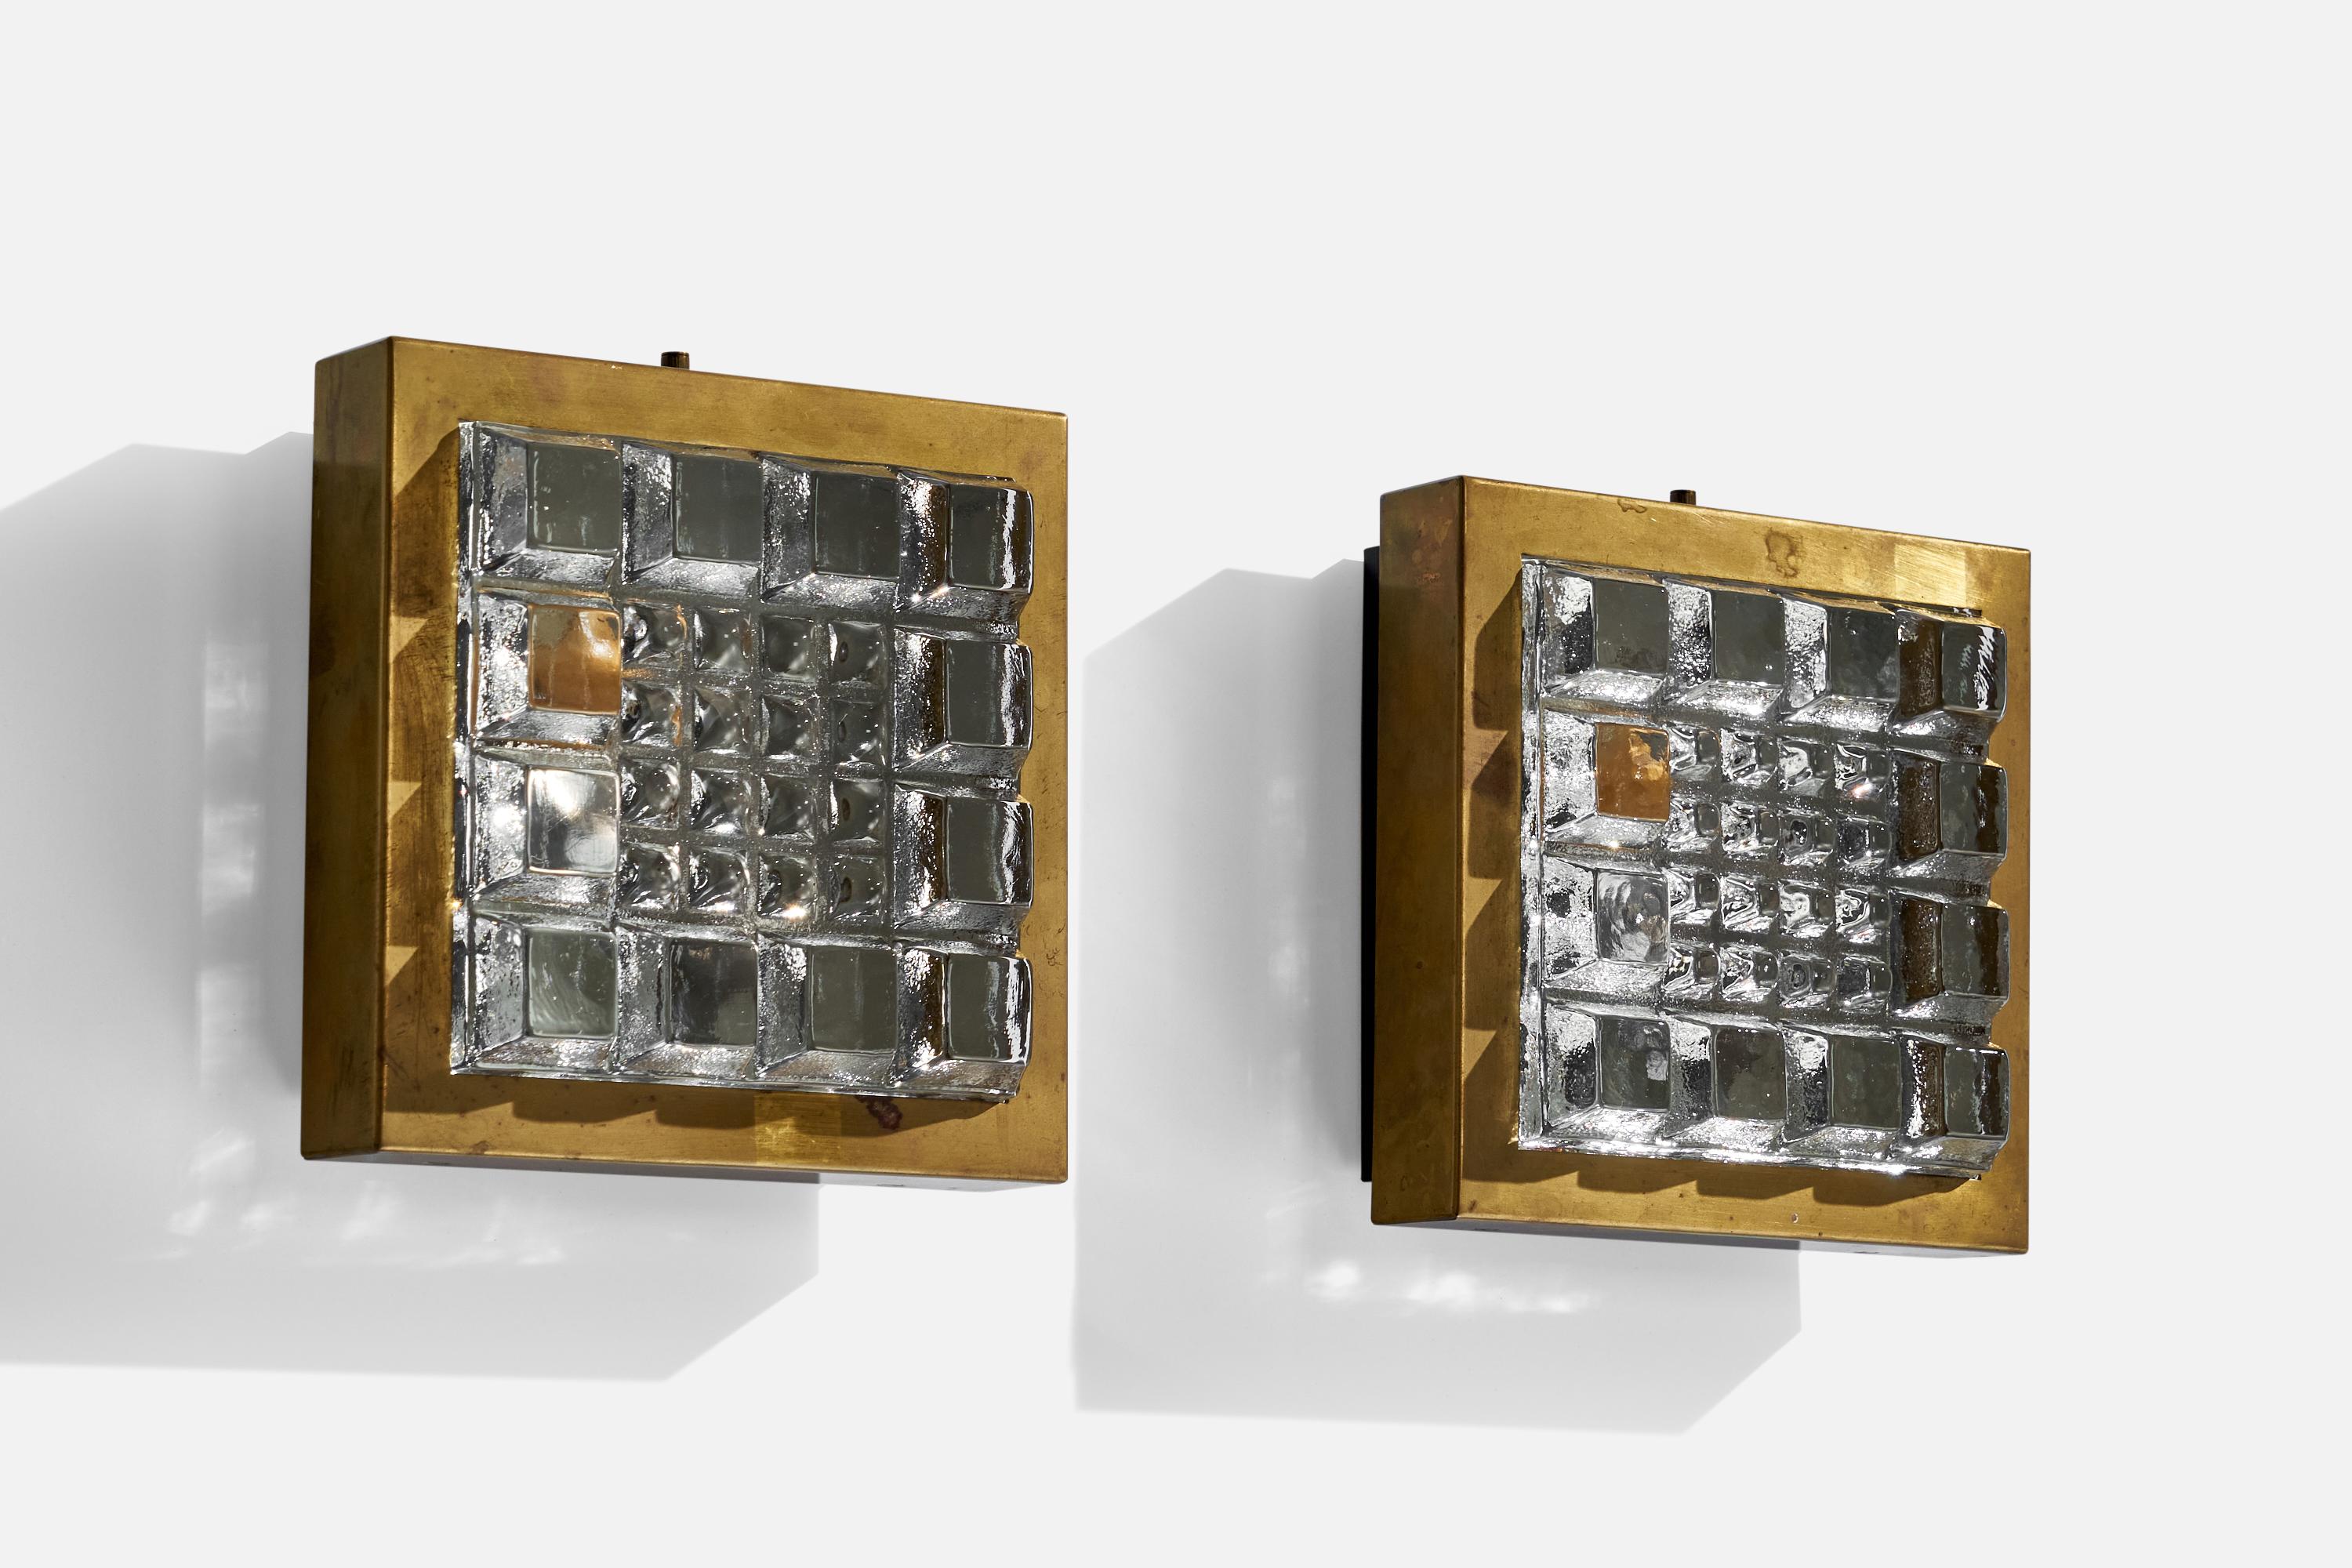 A pair of brass and glass wall lights or flush mounts designed and produced in Sweden, 1960s.

Overall Dimensions (inches): 7.50” H x 7.25” W x 3.50” D
Back Plate Dimensions (inches): N/A
Bulb Specifications: E-14 Bulb
Number of Sockets: 2
All